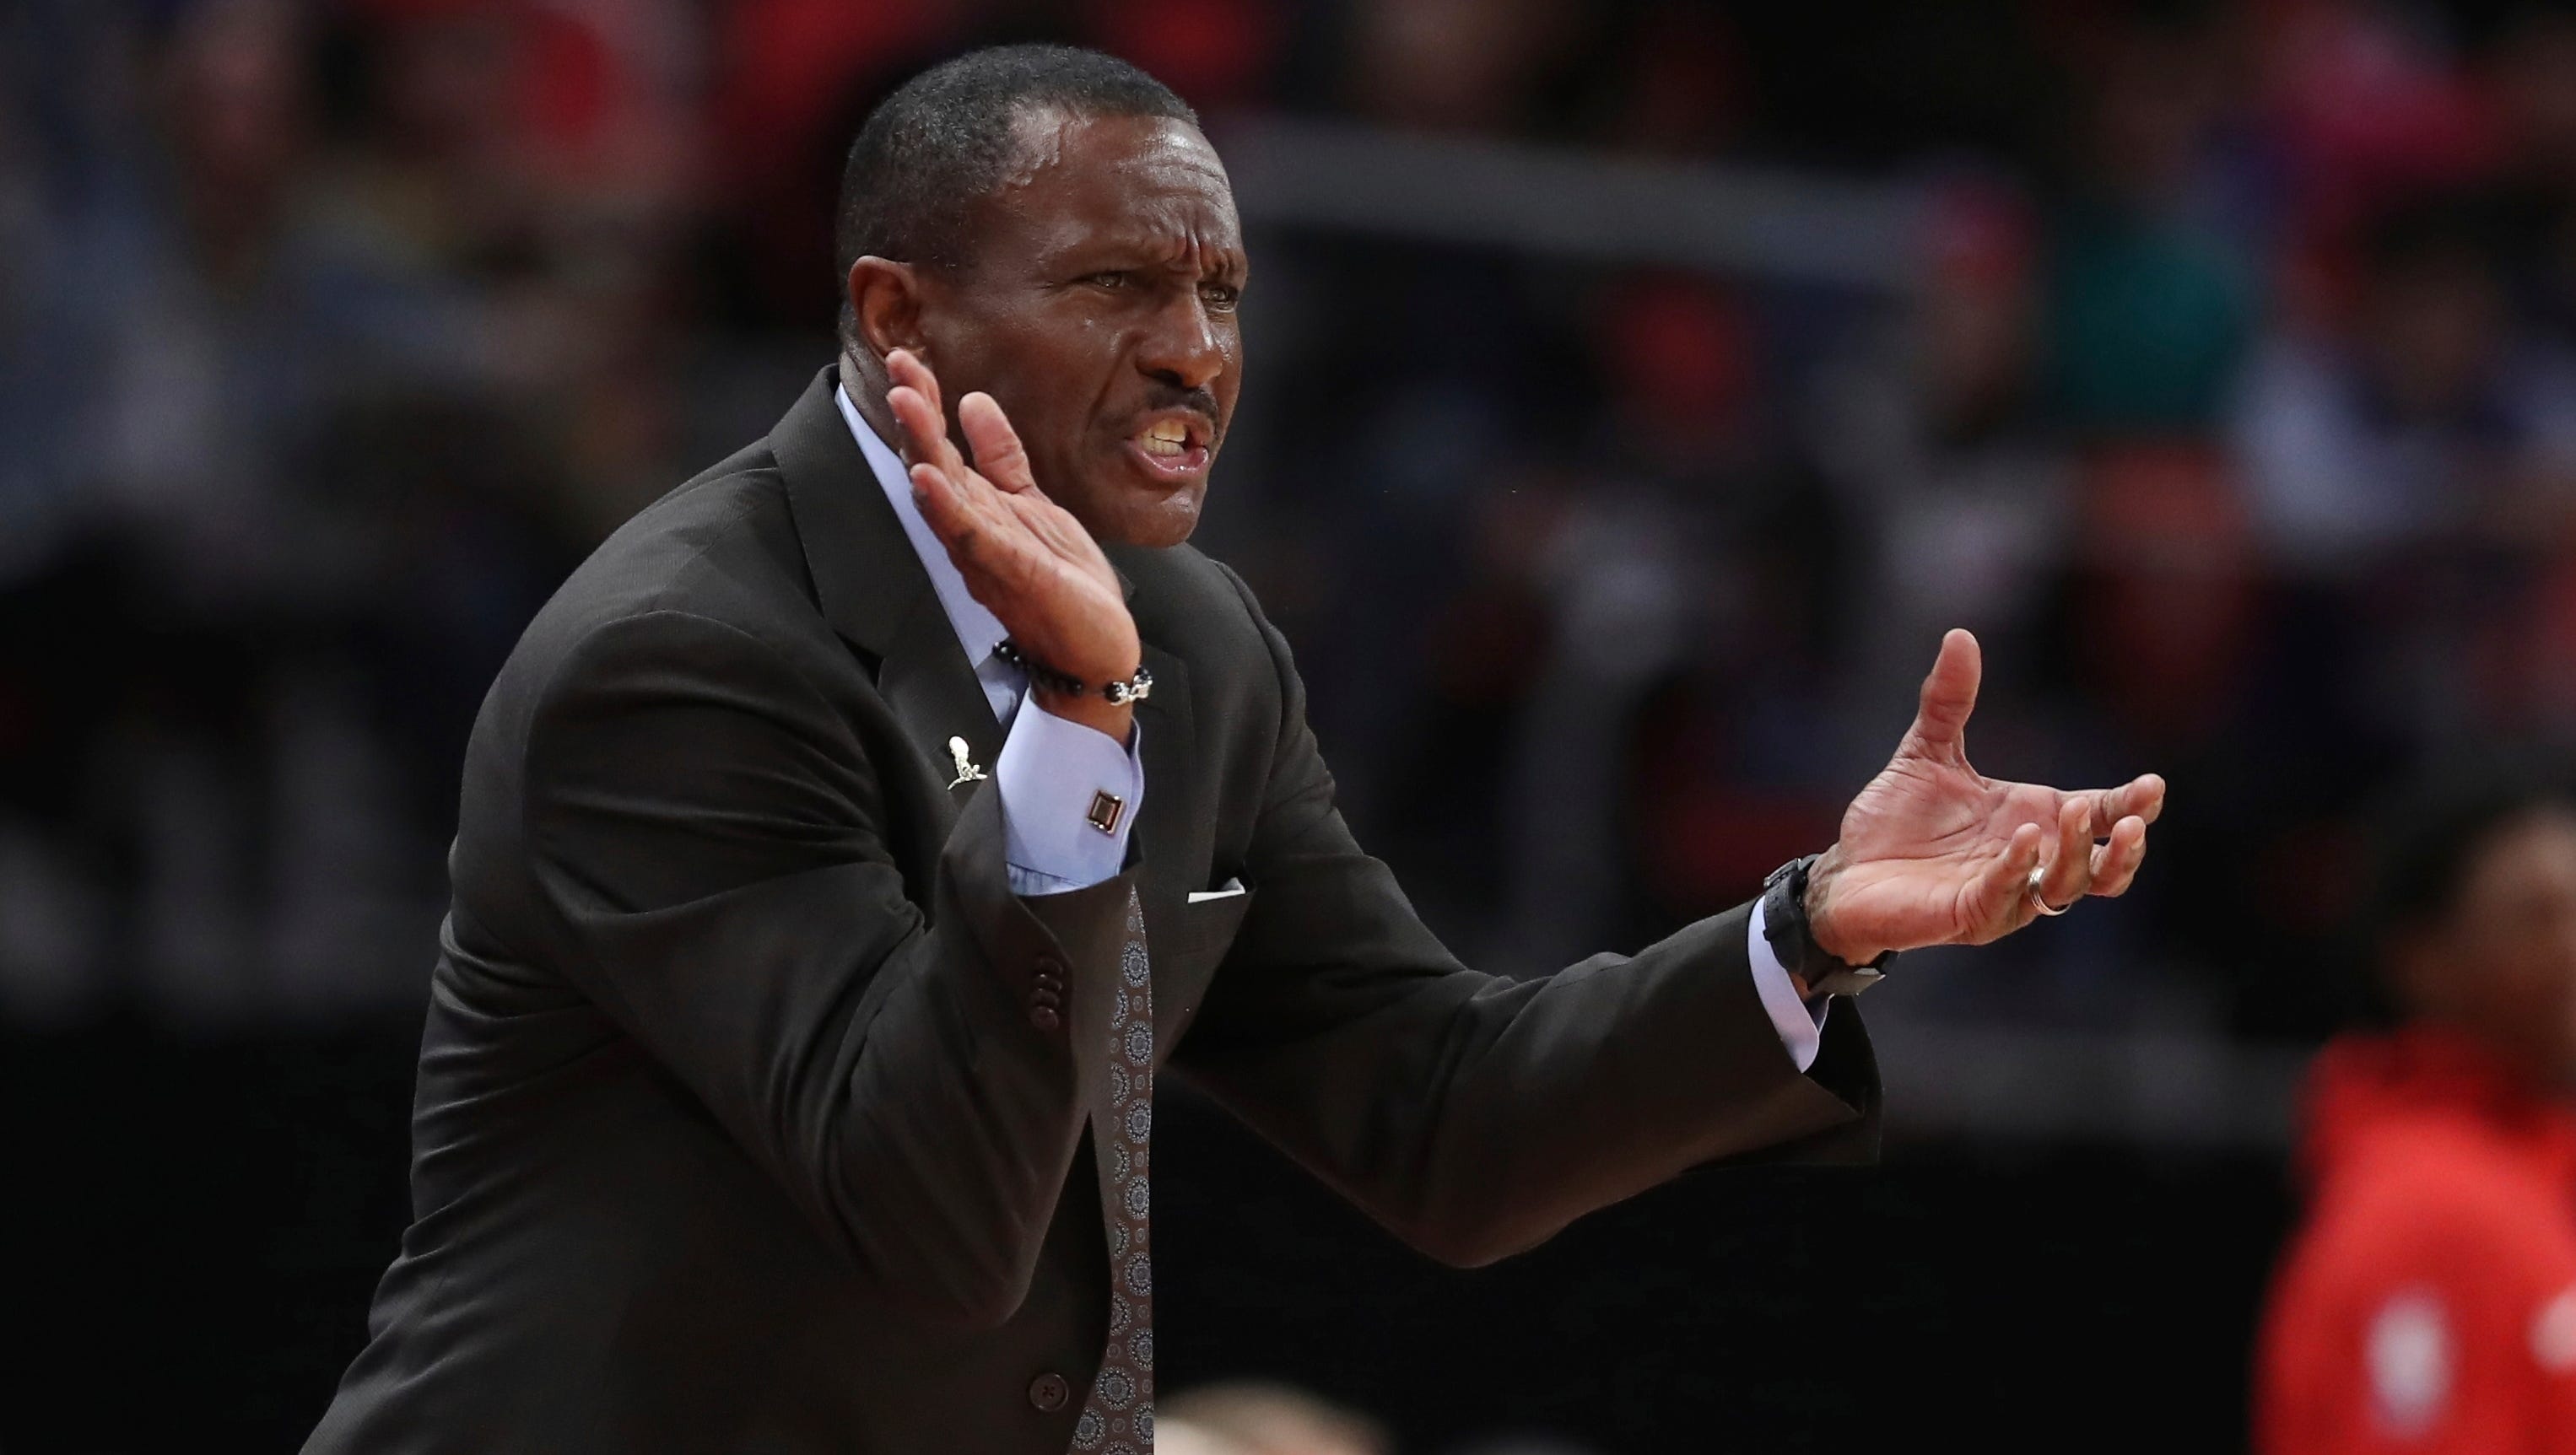 Toronto Raptors head coach Dwane Casey reacts on the sidelines during the second half of an NBA basketball game against the Detroit Pistons, Monday, April 9, 2018, in Detroit.